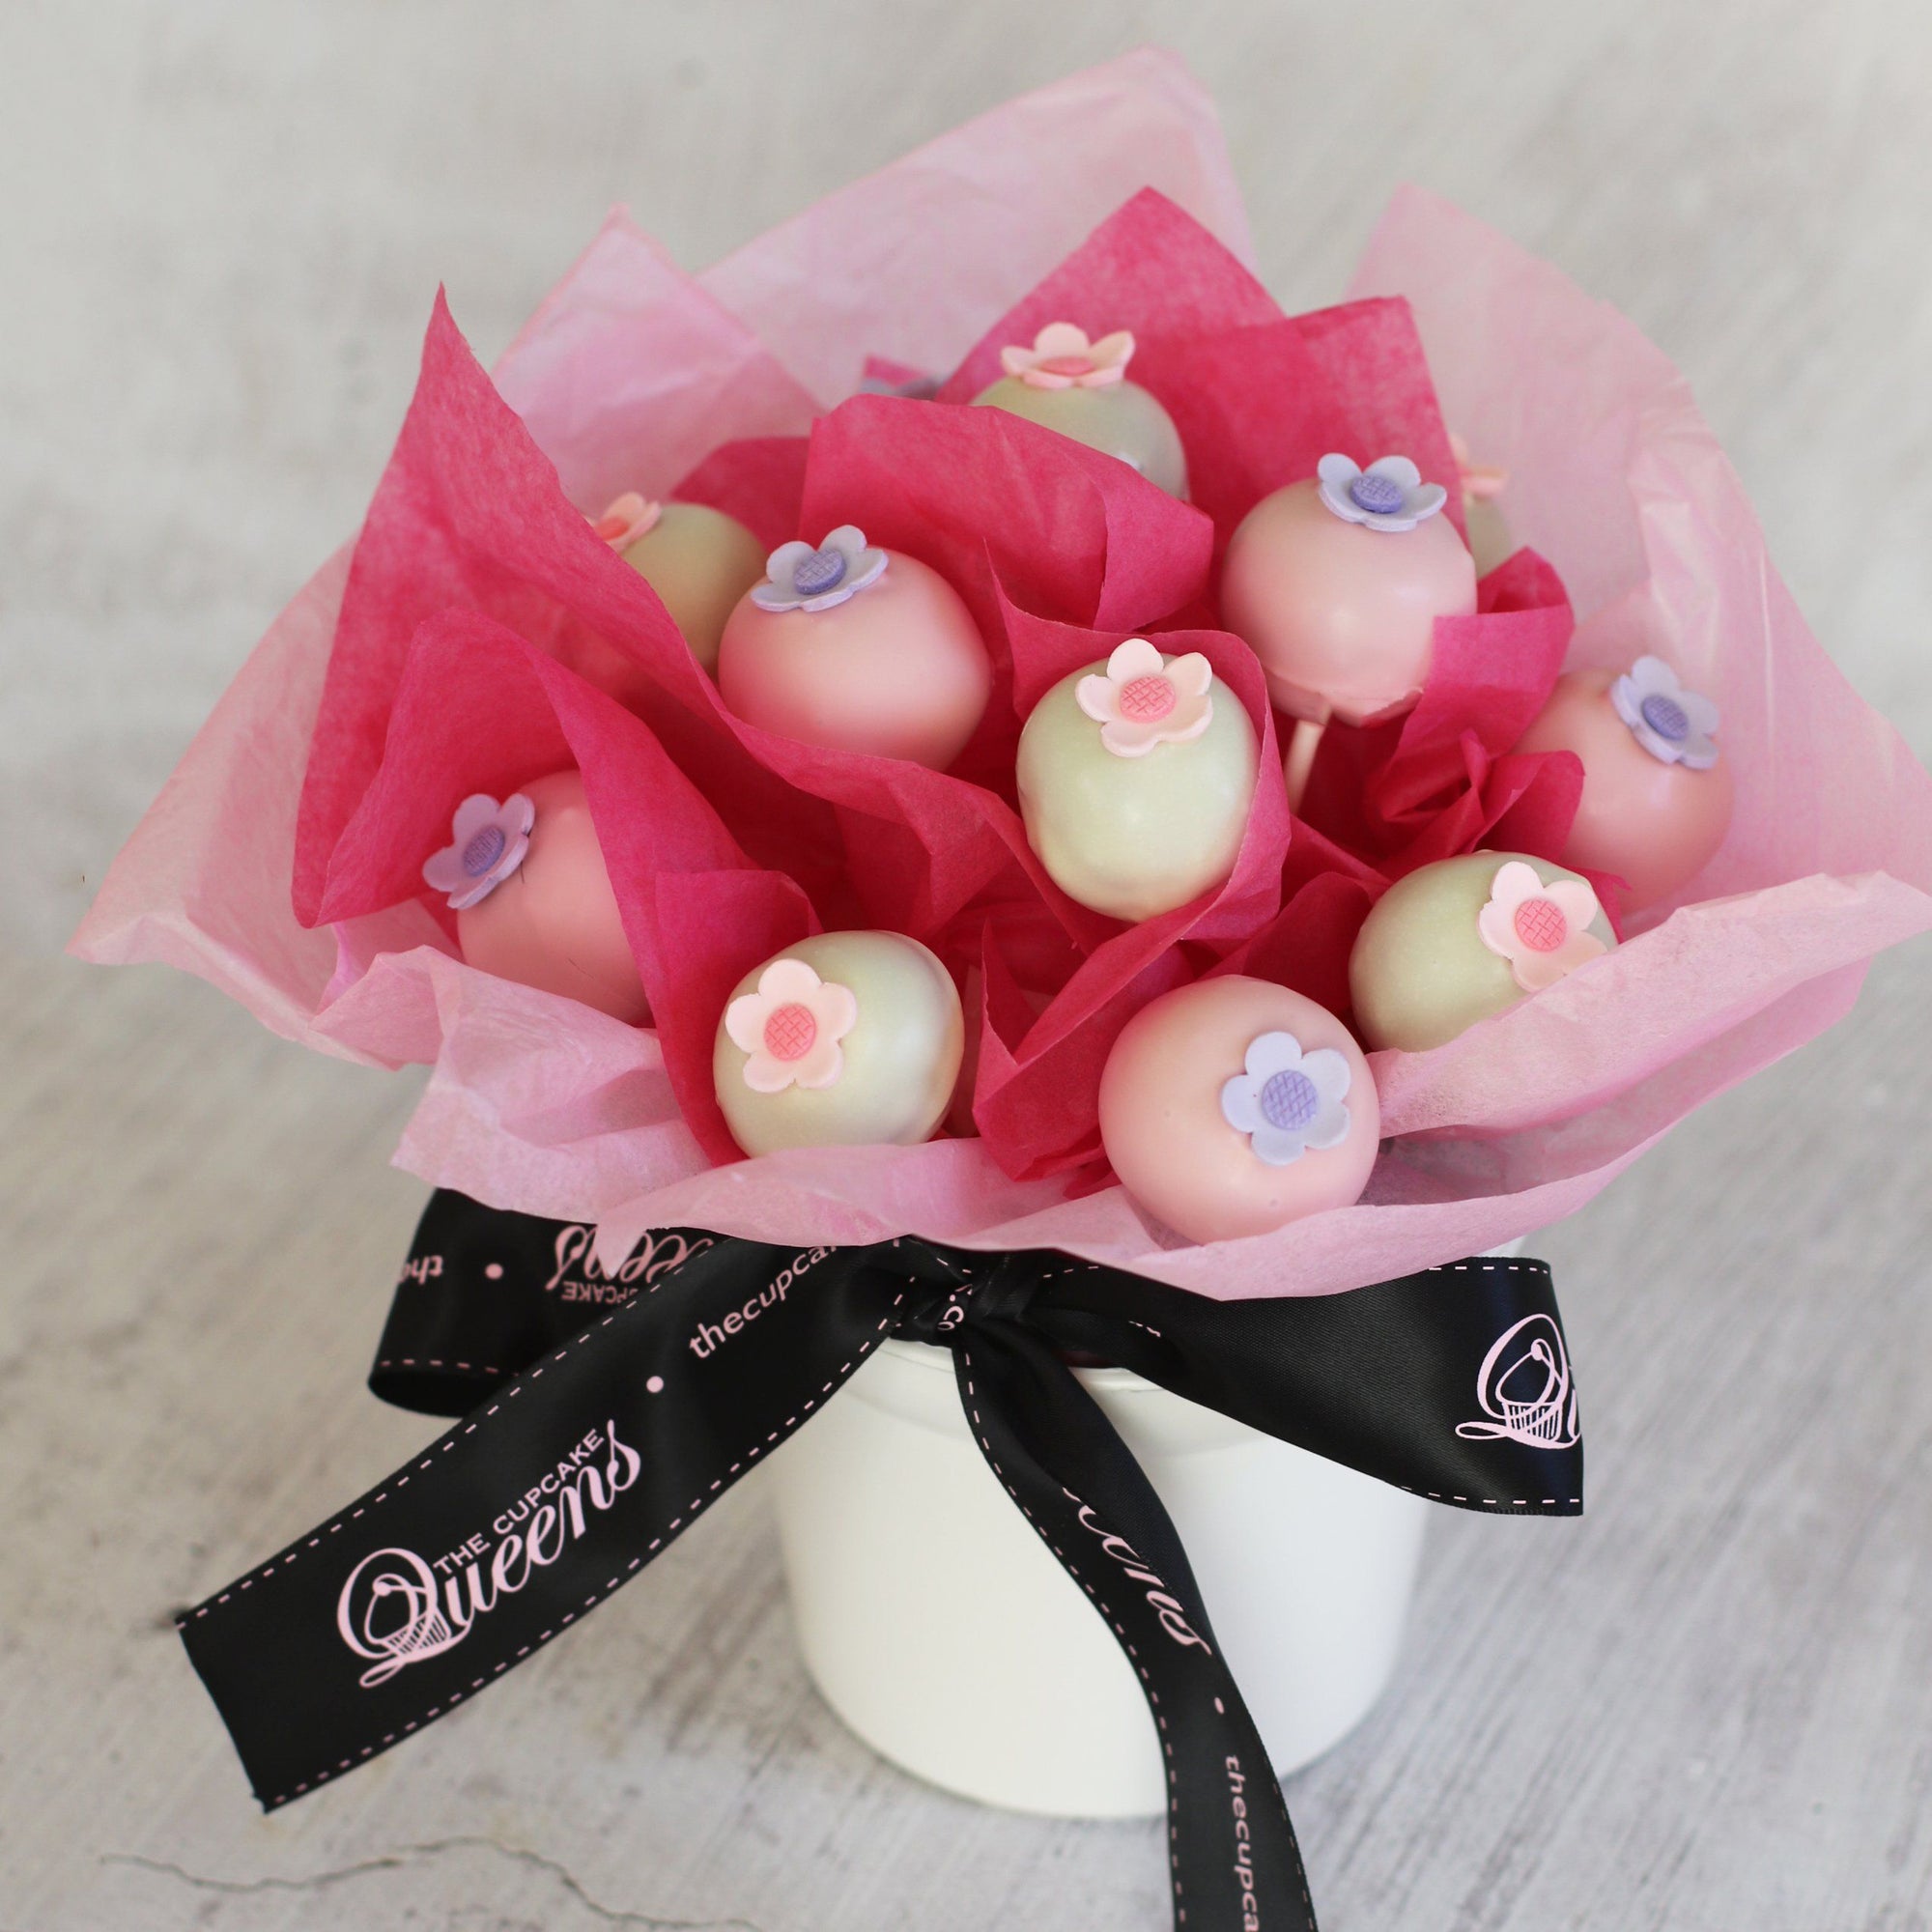 Mother's Day Cake Pop Bouquet Special Occasion The Cupcake Queens 